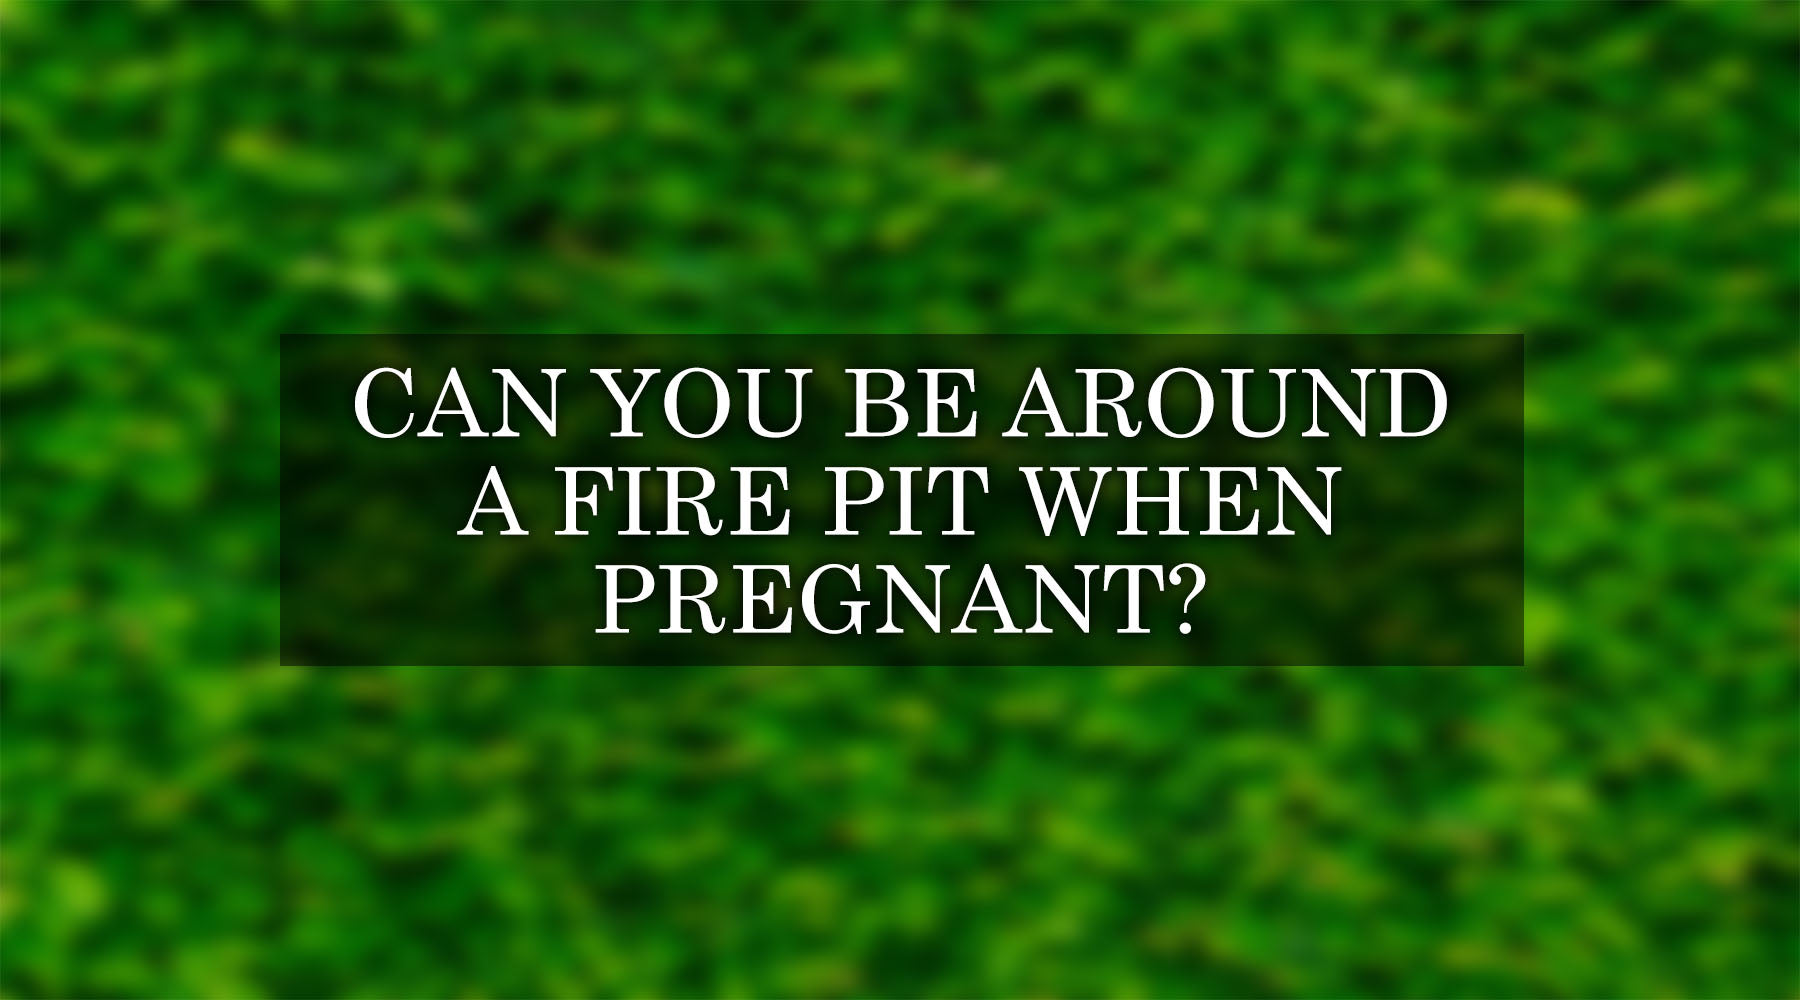 Can You Be Around a Fire Pit When Pregnant?